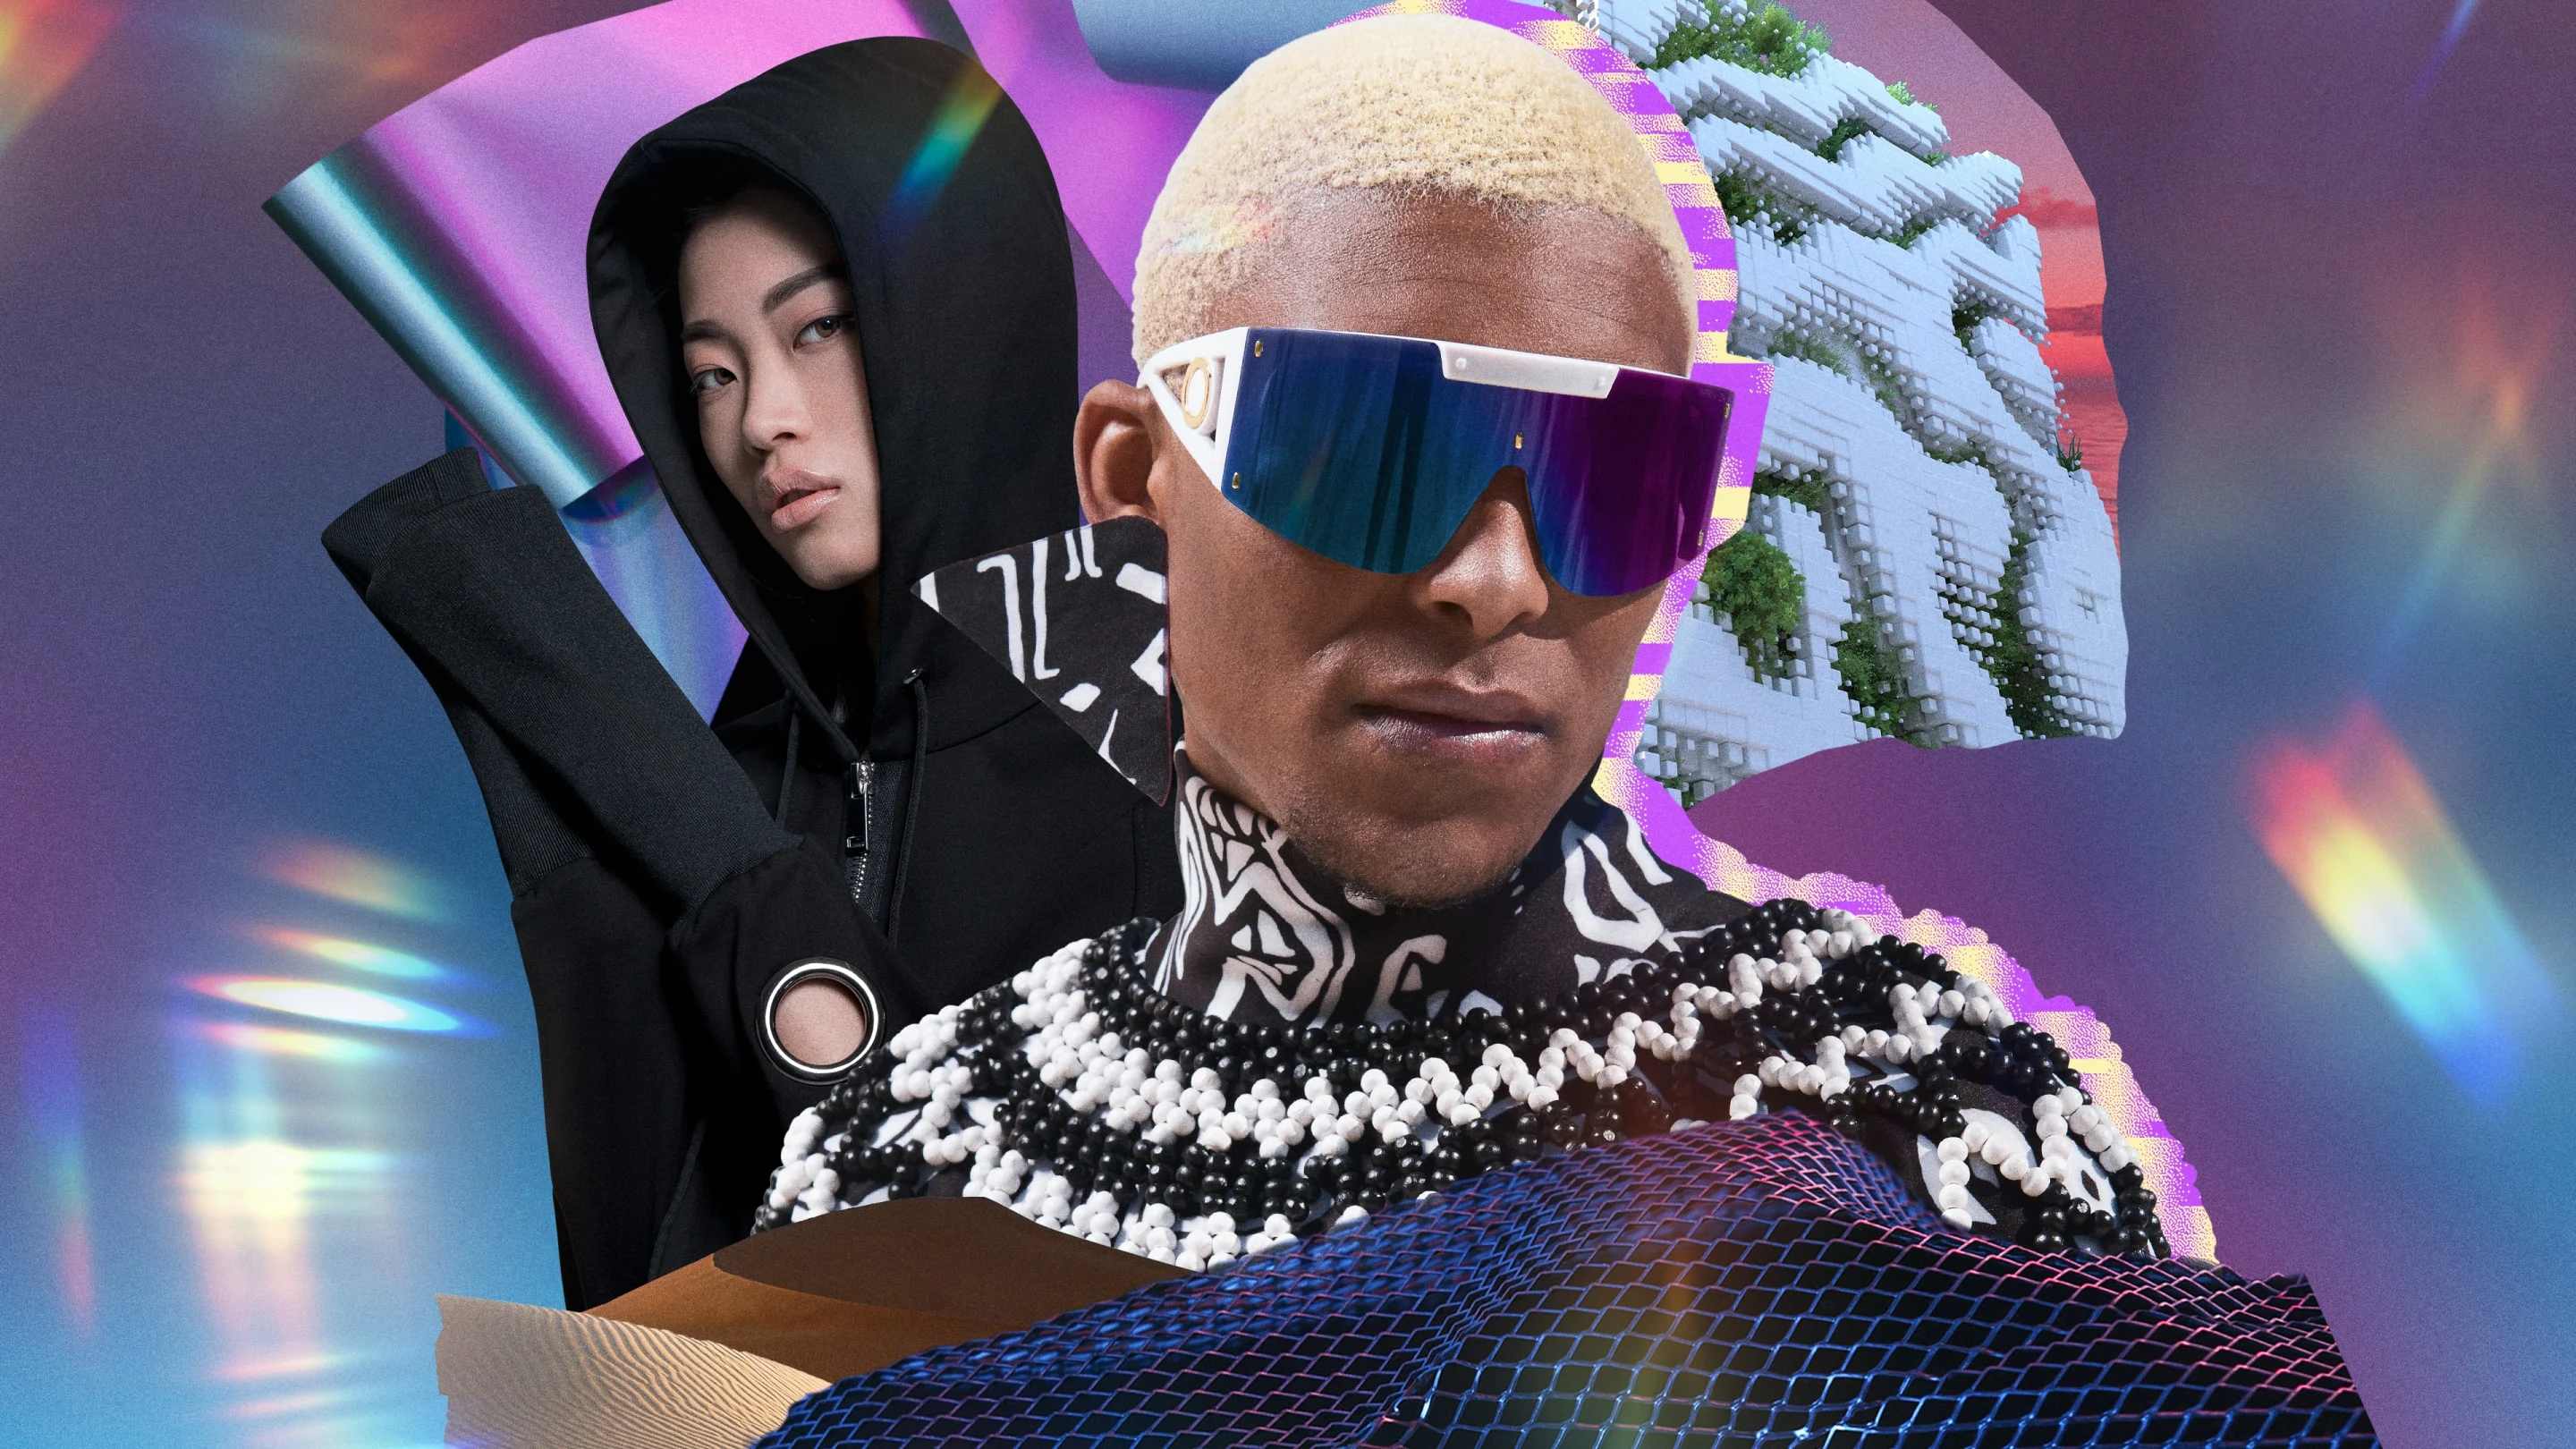 A futuristic collage featuring an Asian woman and a Black man wearing various interpretations of this galactic, dystopian style trend.